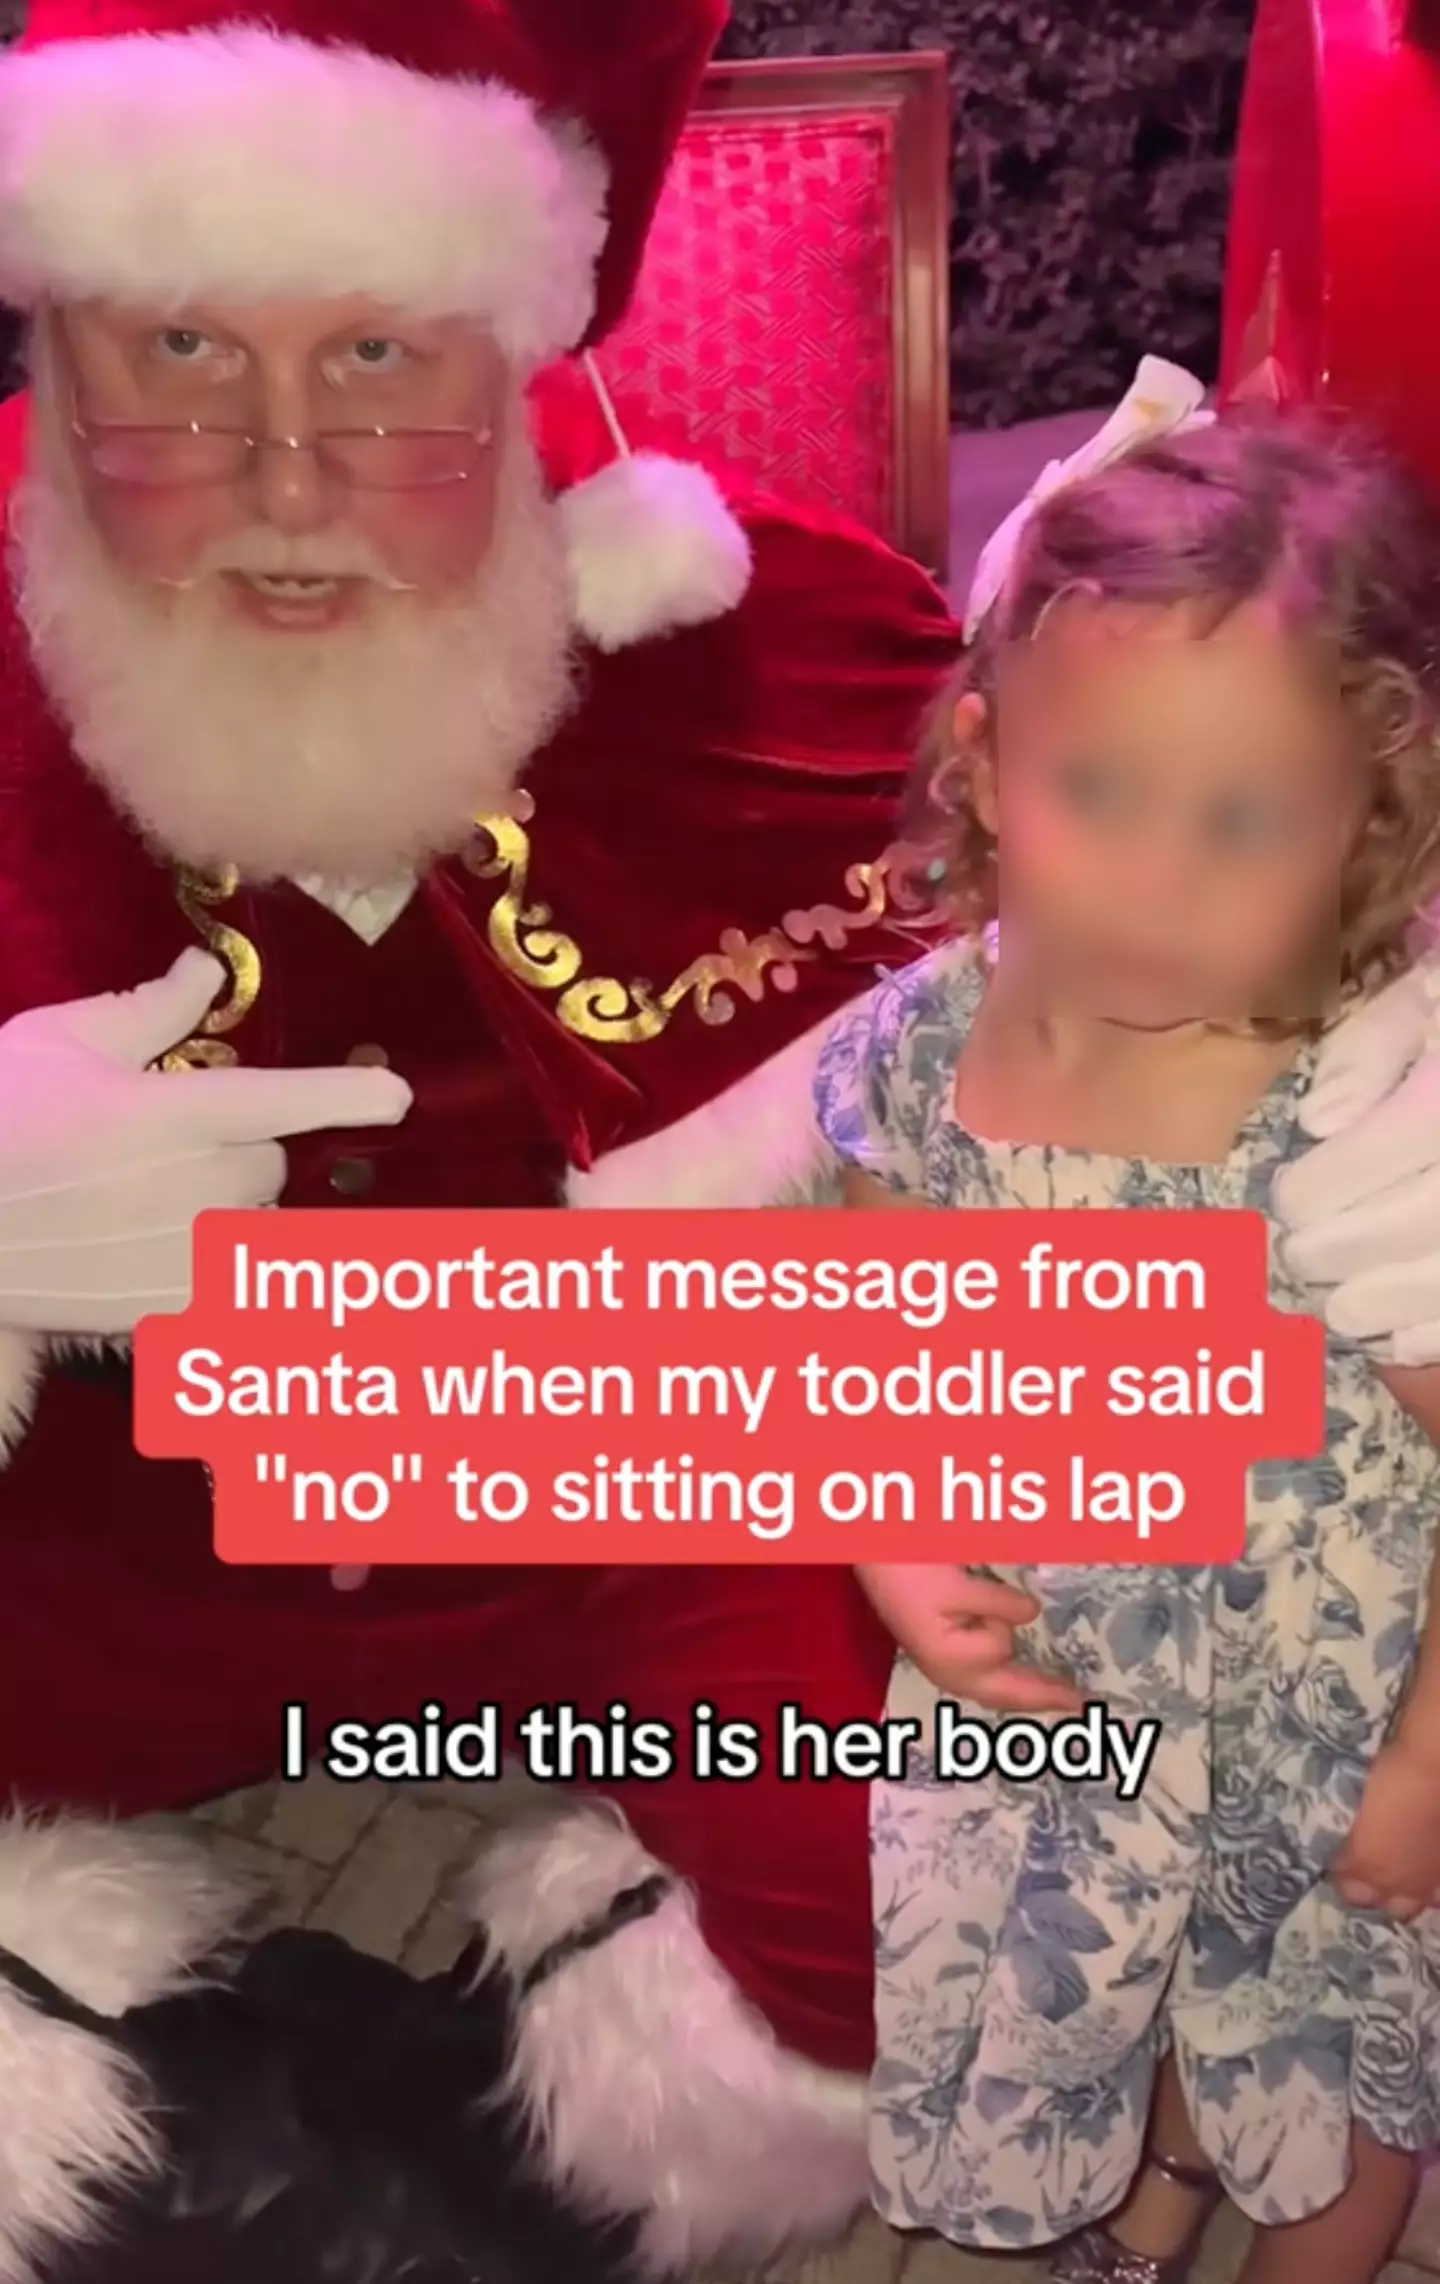 The youngster declined to sit on Santa's lap.